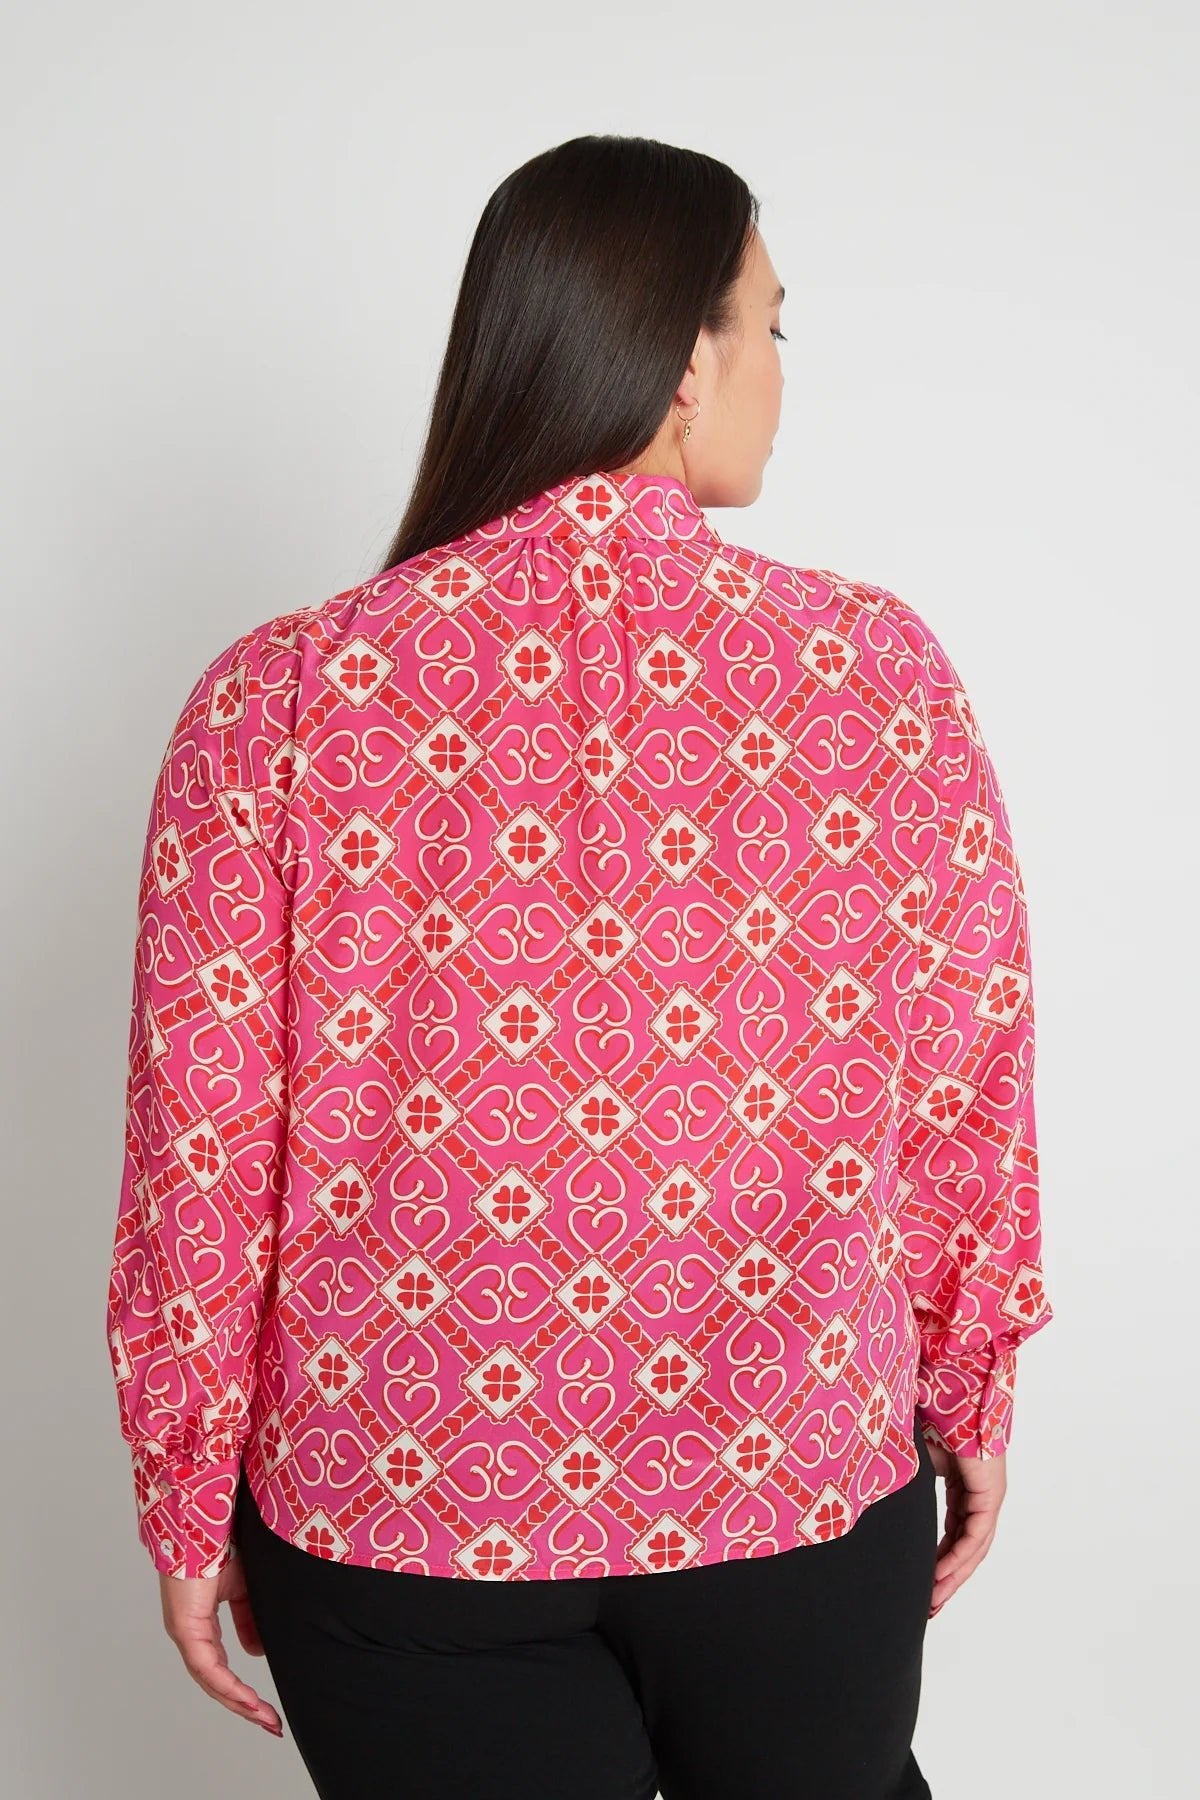 twenty-seven names | Unchained Melody Shirt | Magenta Hearts | Palm Boutique